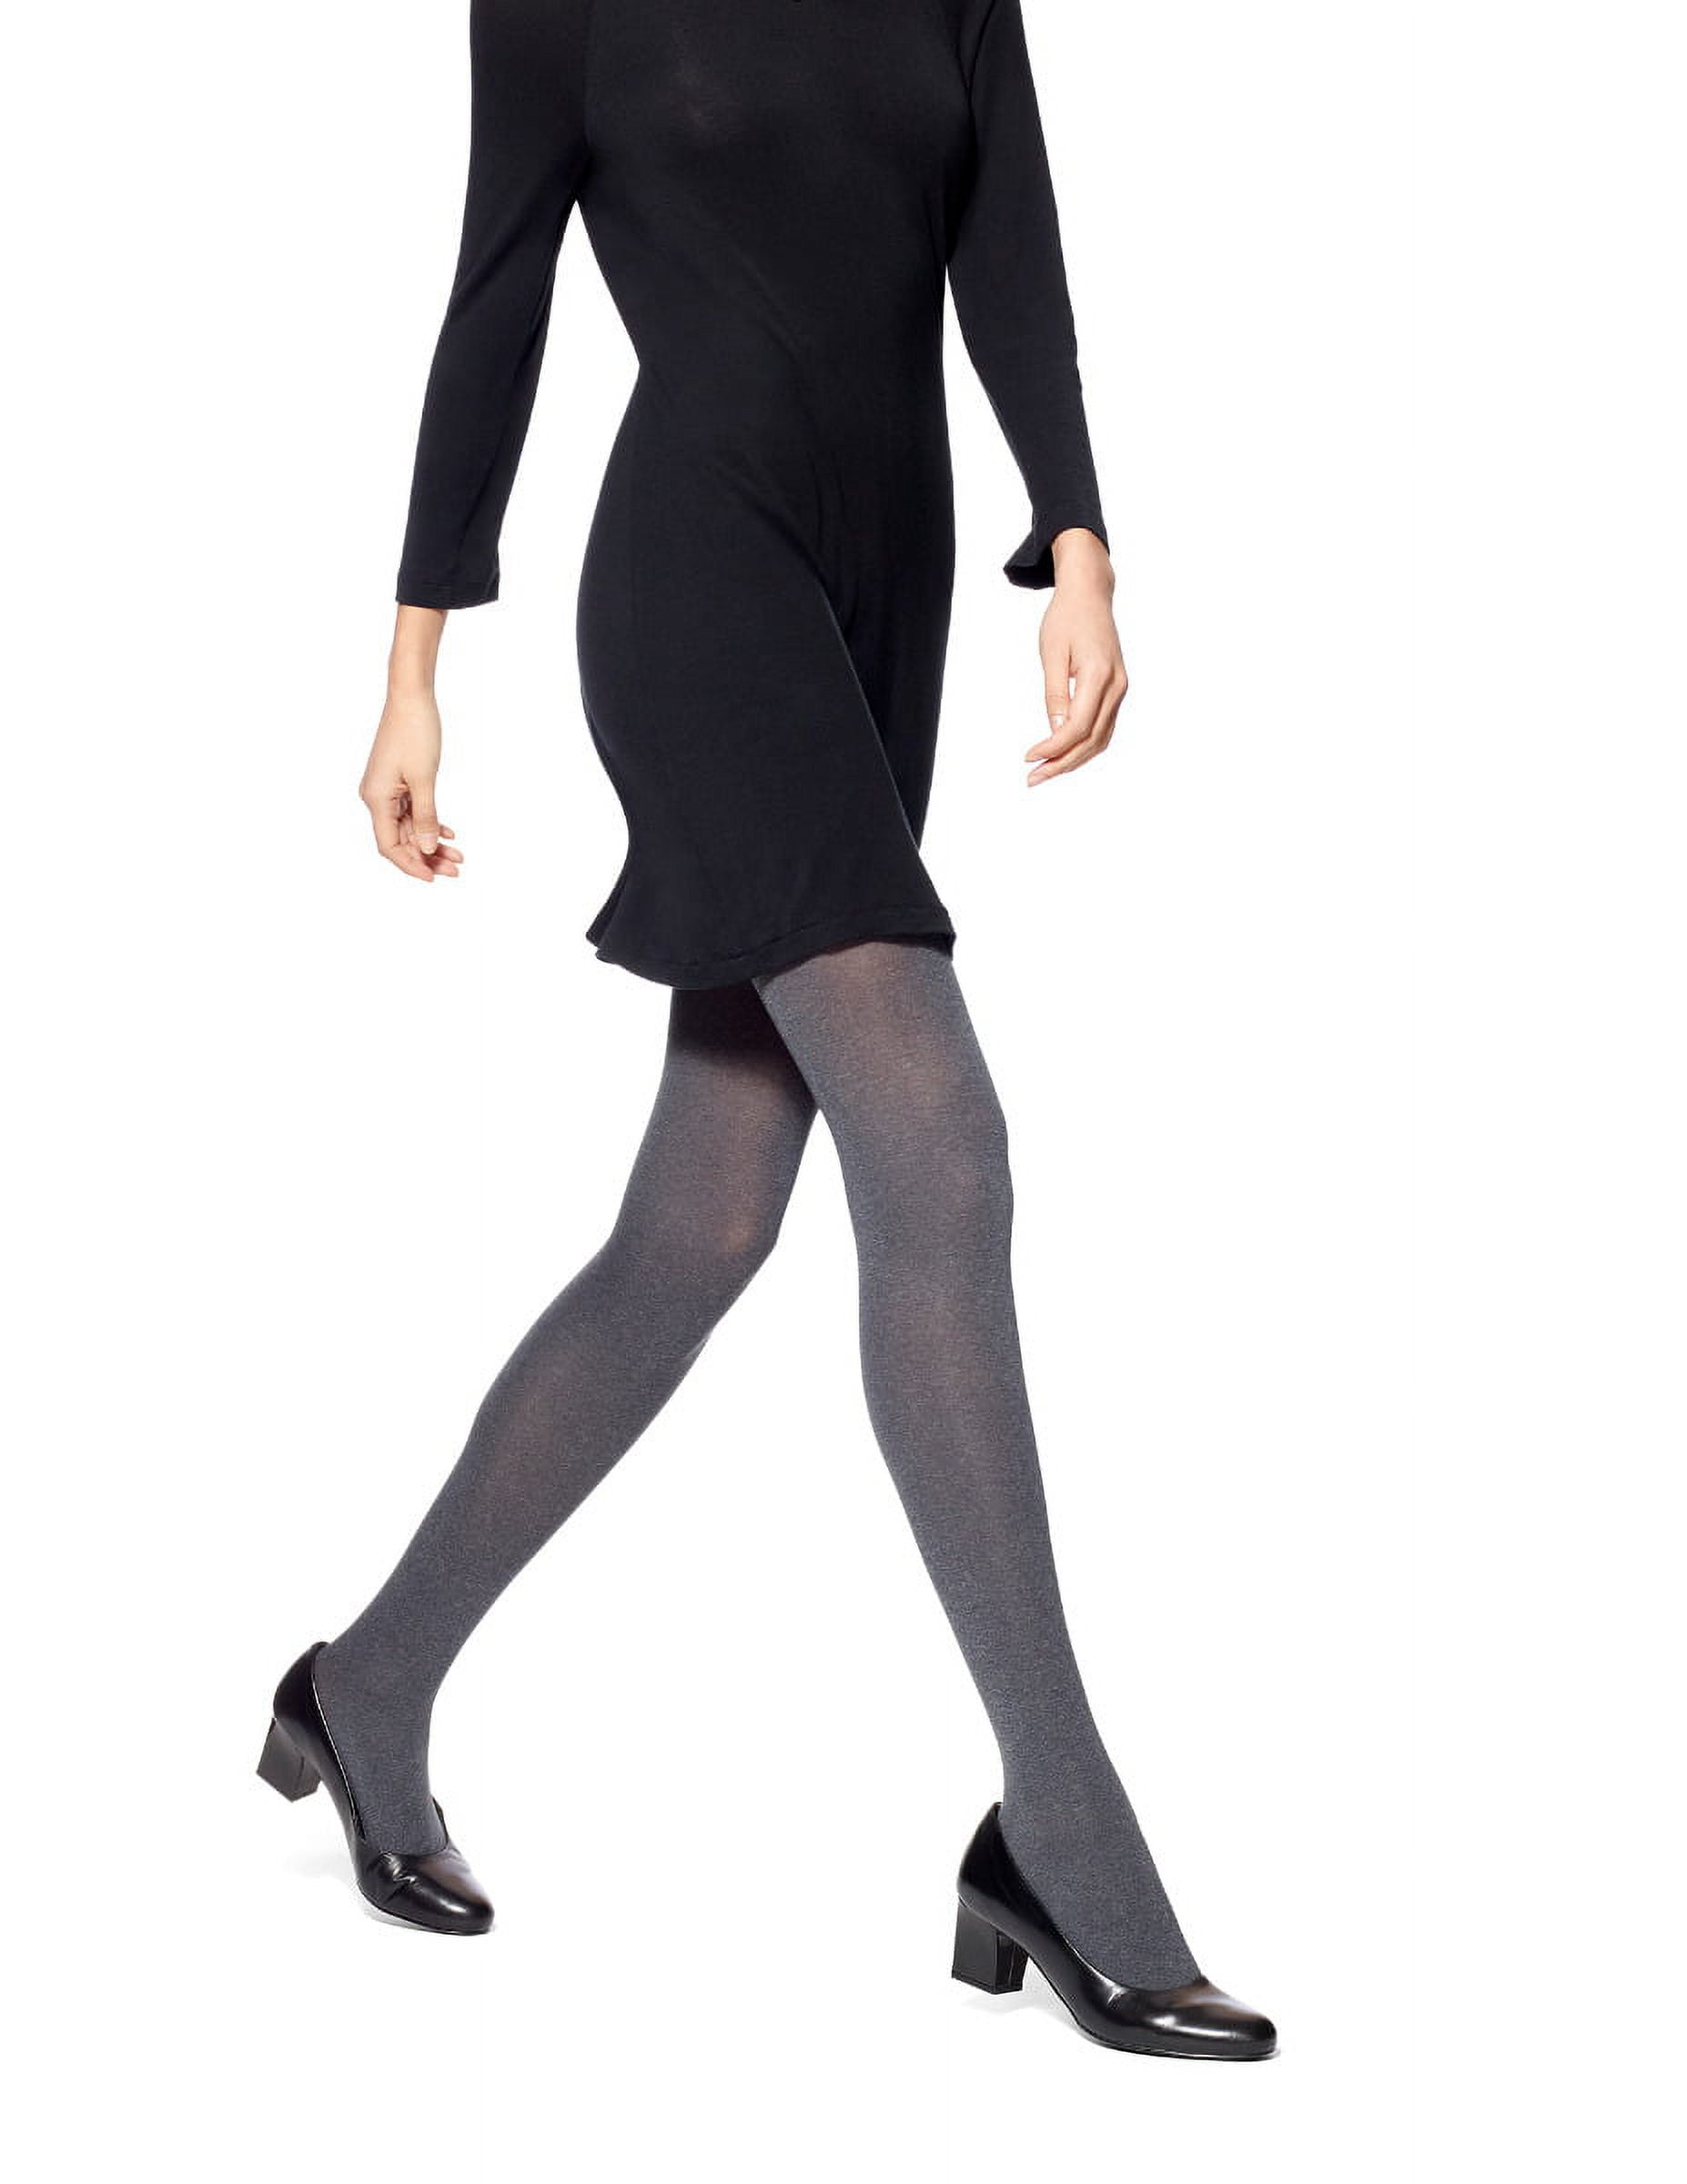 No nonsense Women's Super Opaque Control Top Tights 1 Pair Pack Graphite  Heather XL 